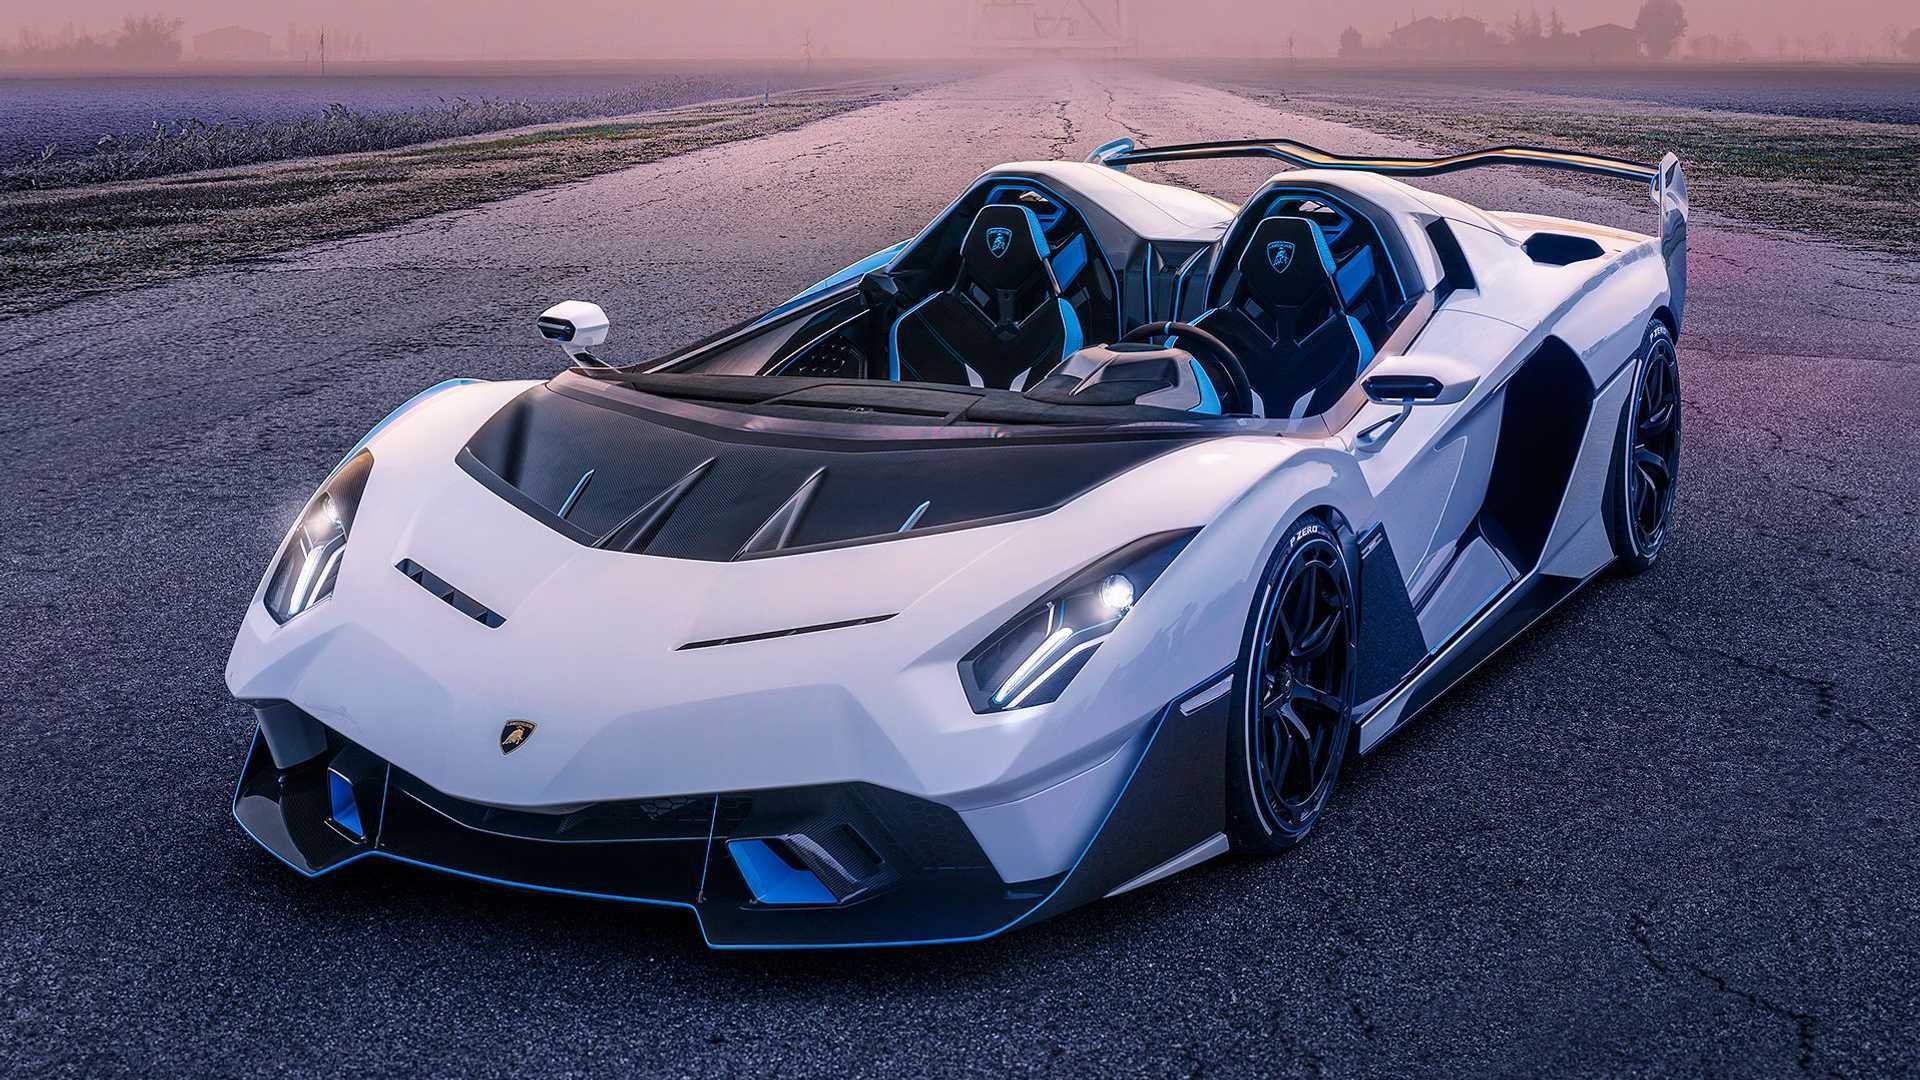 Lamborghini SC20 Is A Roofless 770-HP Aventador Approved For Road Use